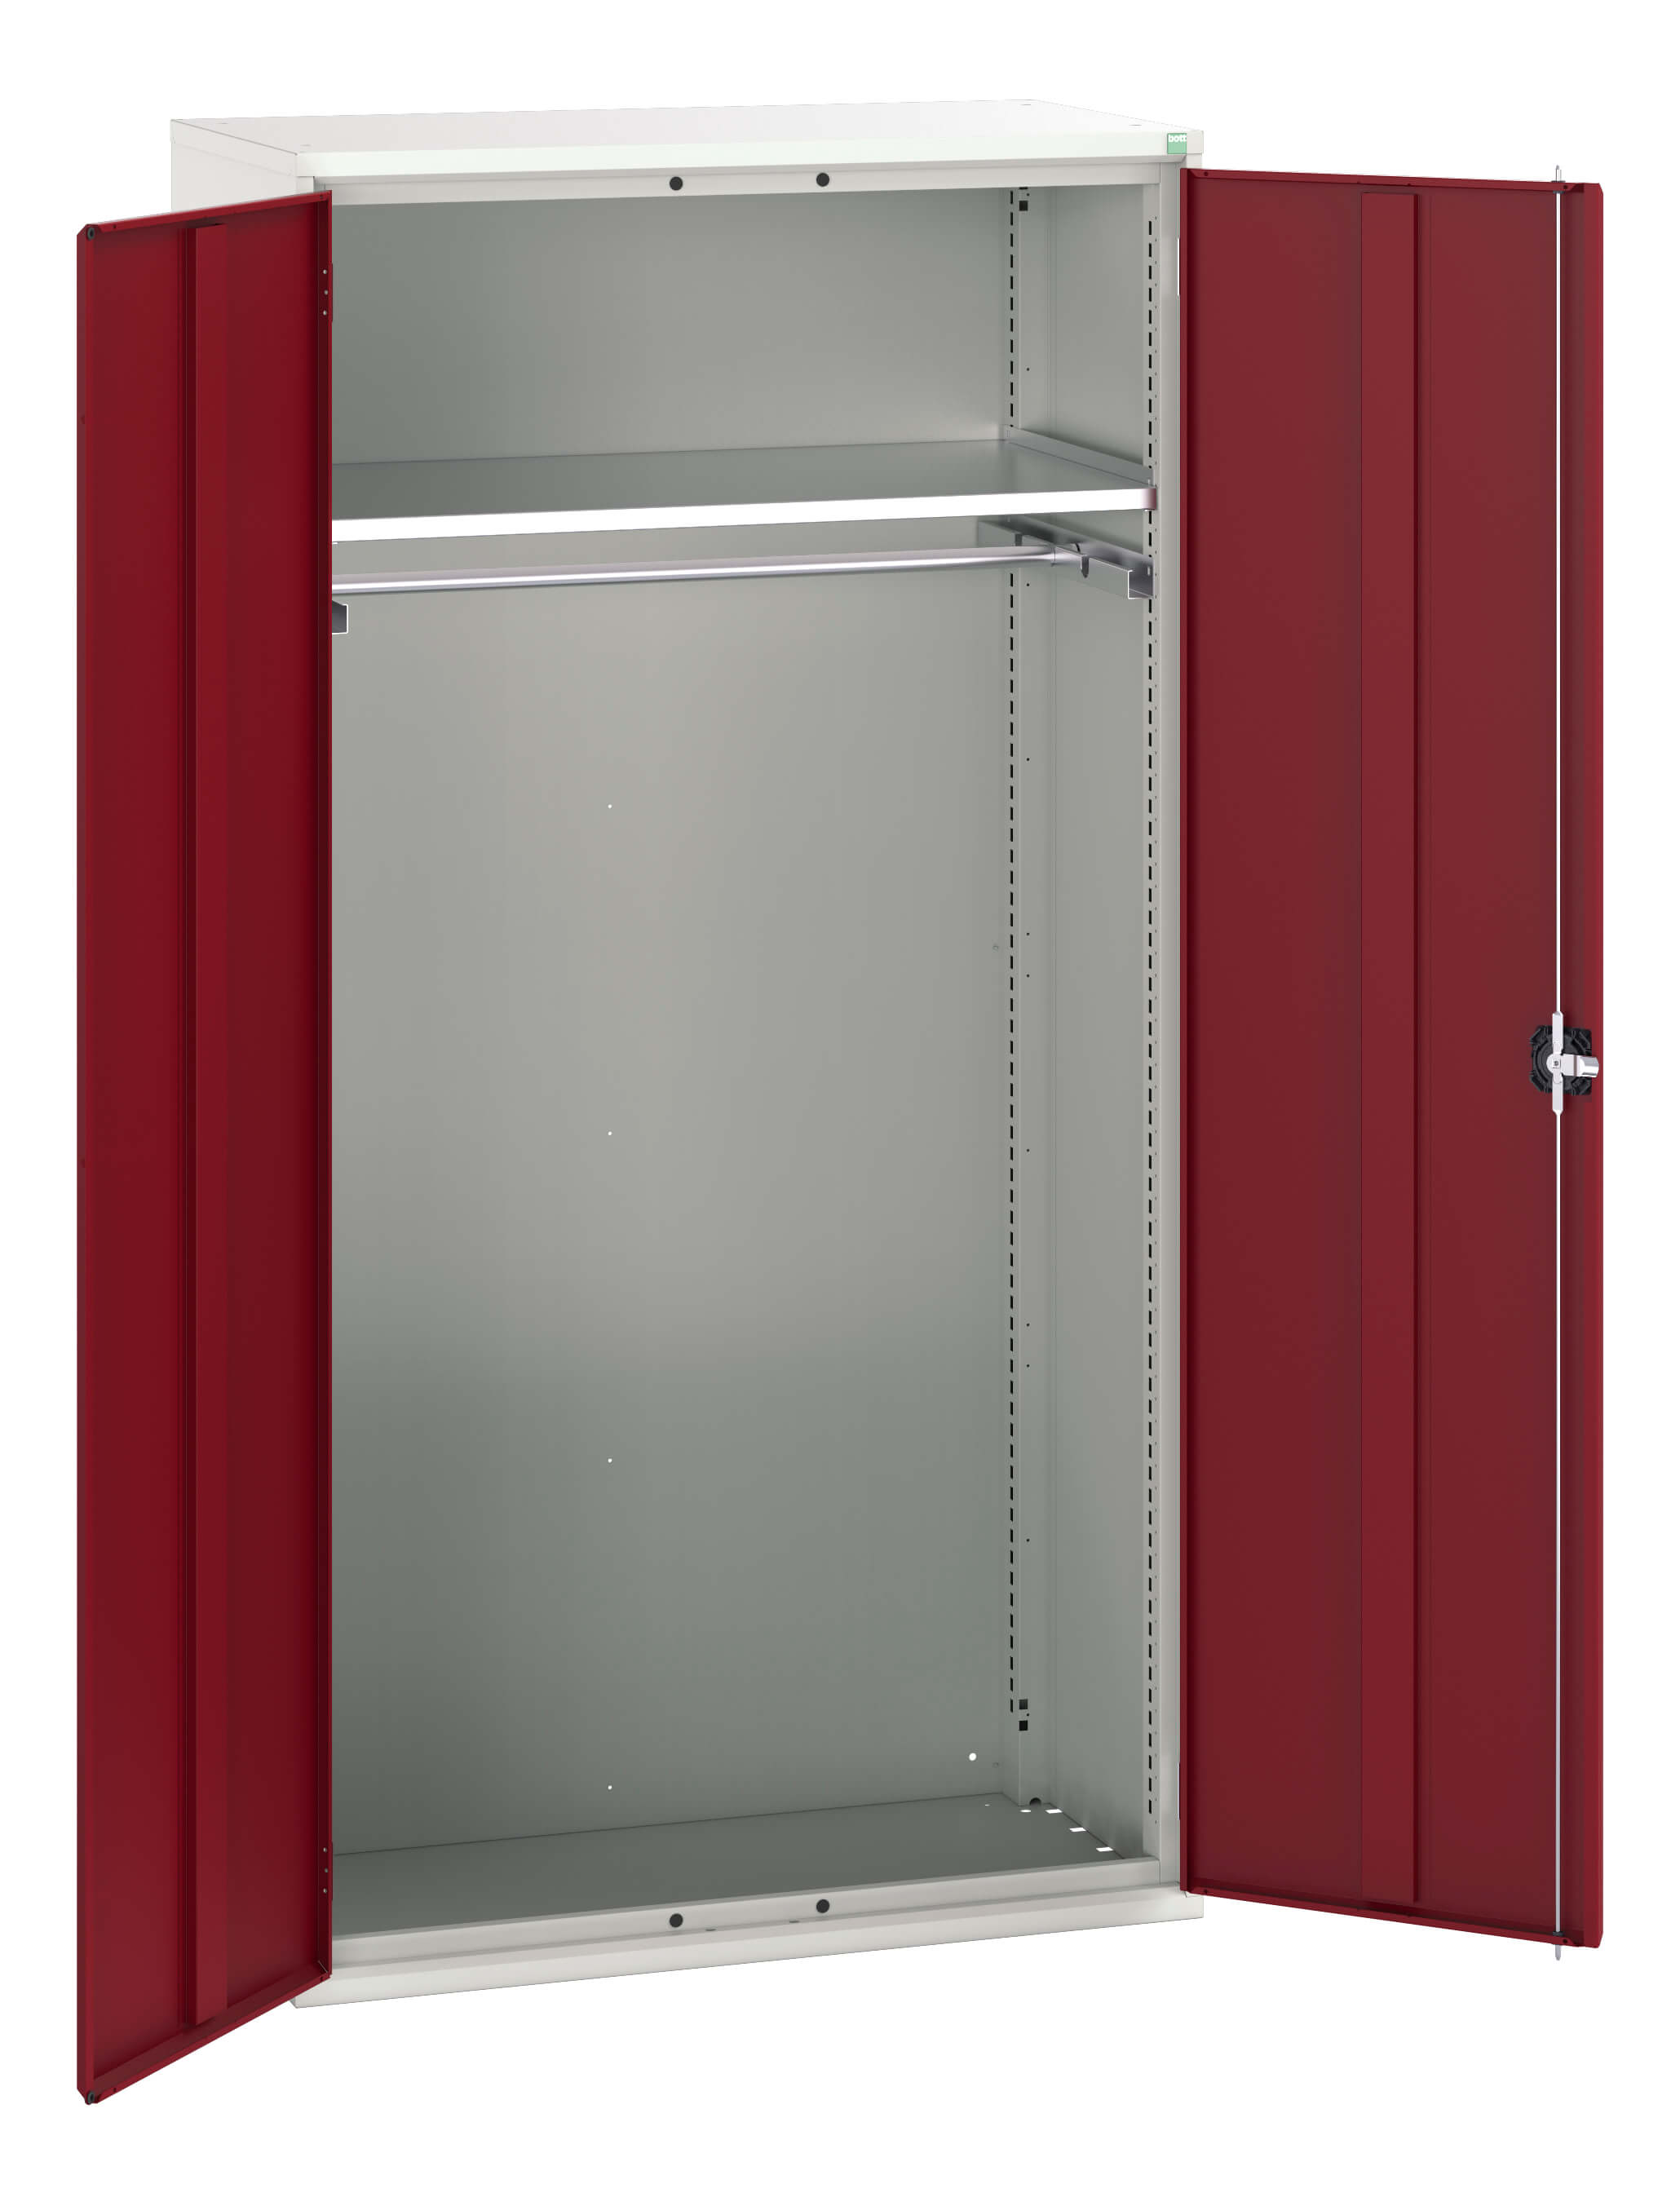 Bott Verso Ppe / Janitorial Kitted Cupboard - 16926584.24